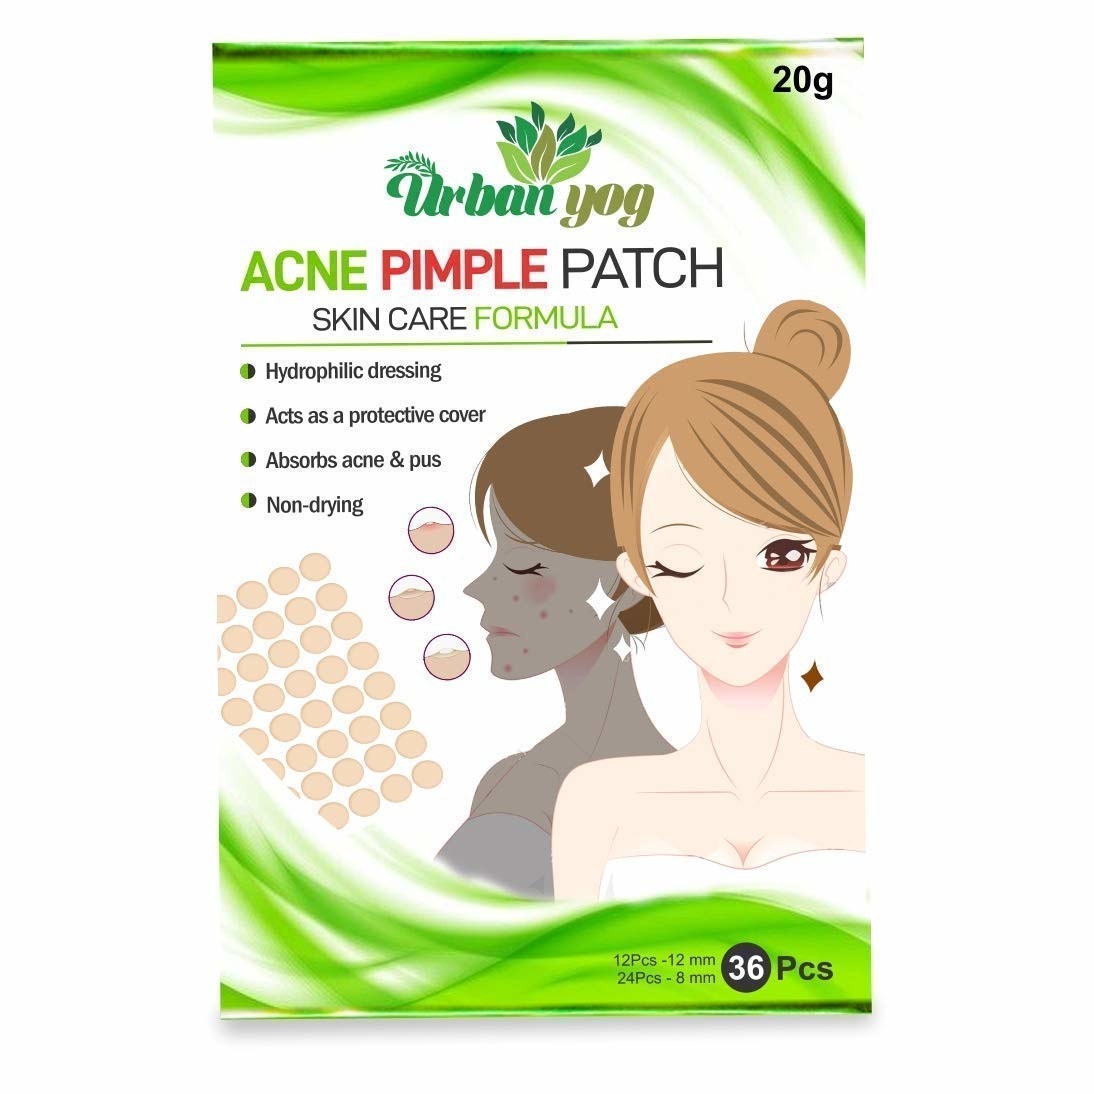 Packaging of the pimple patches 